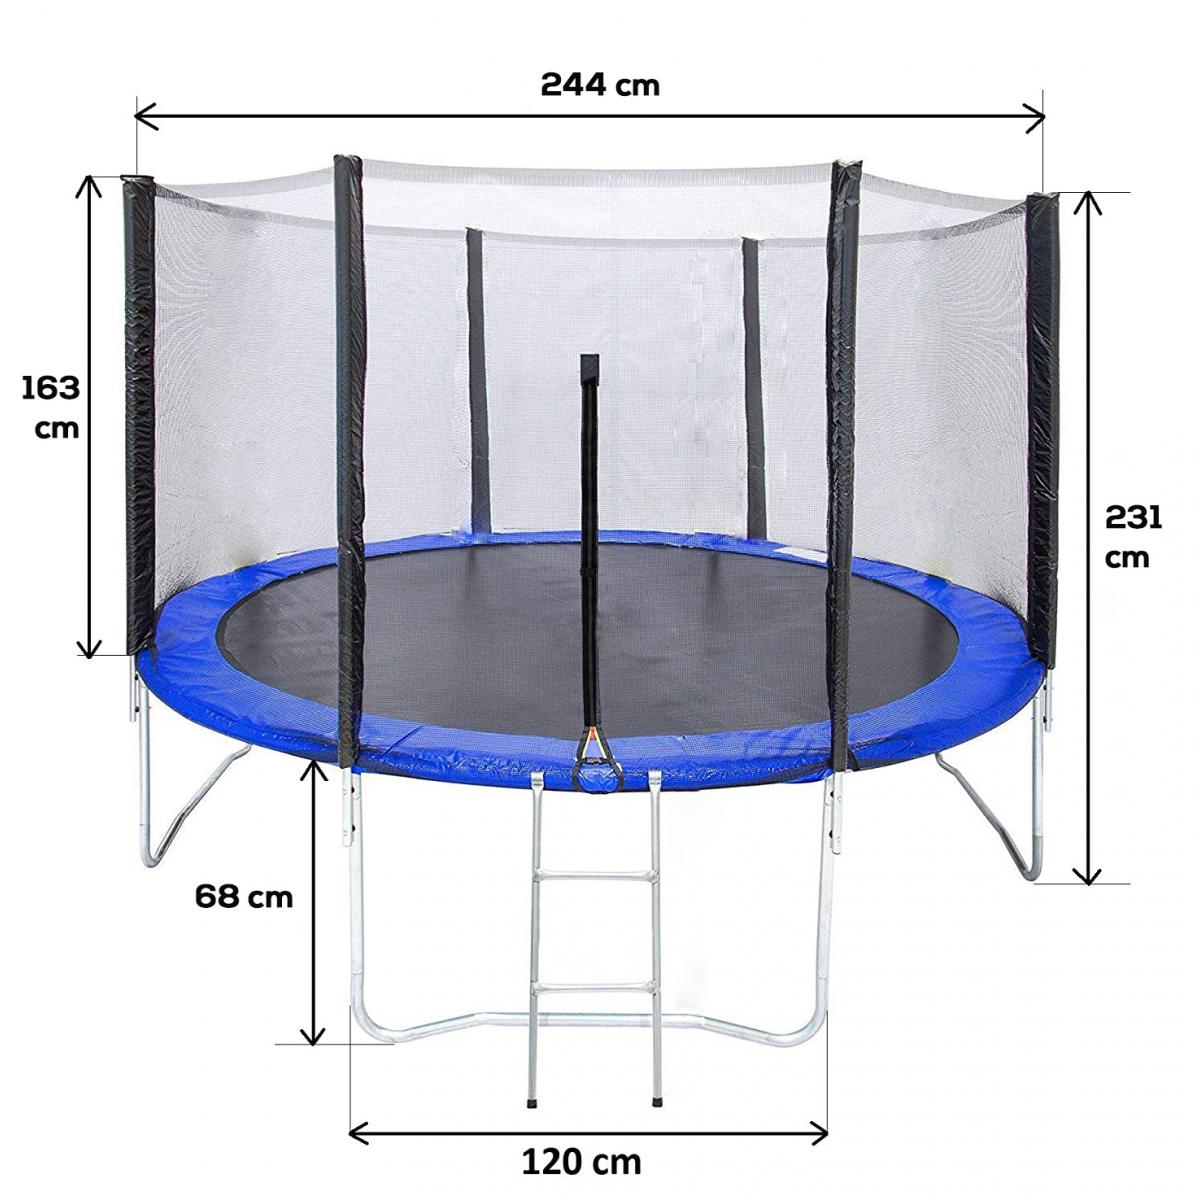 MiBo Trampoline 8ft Net Spring Protection Ladder For Gymnastic Jumping - Blue